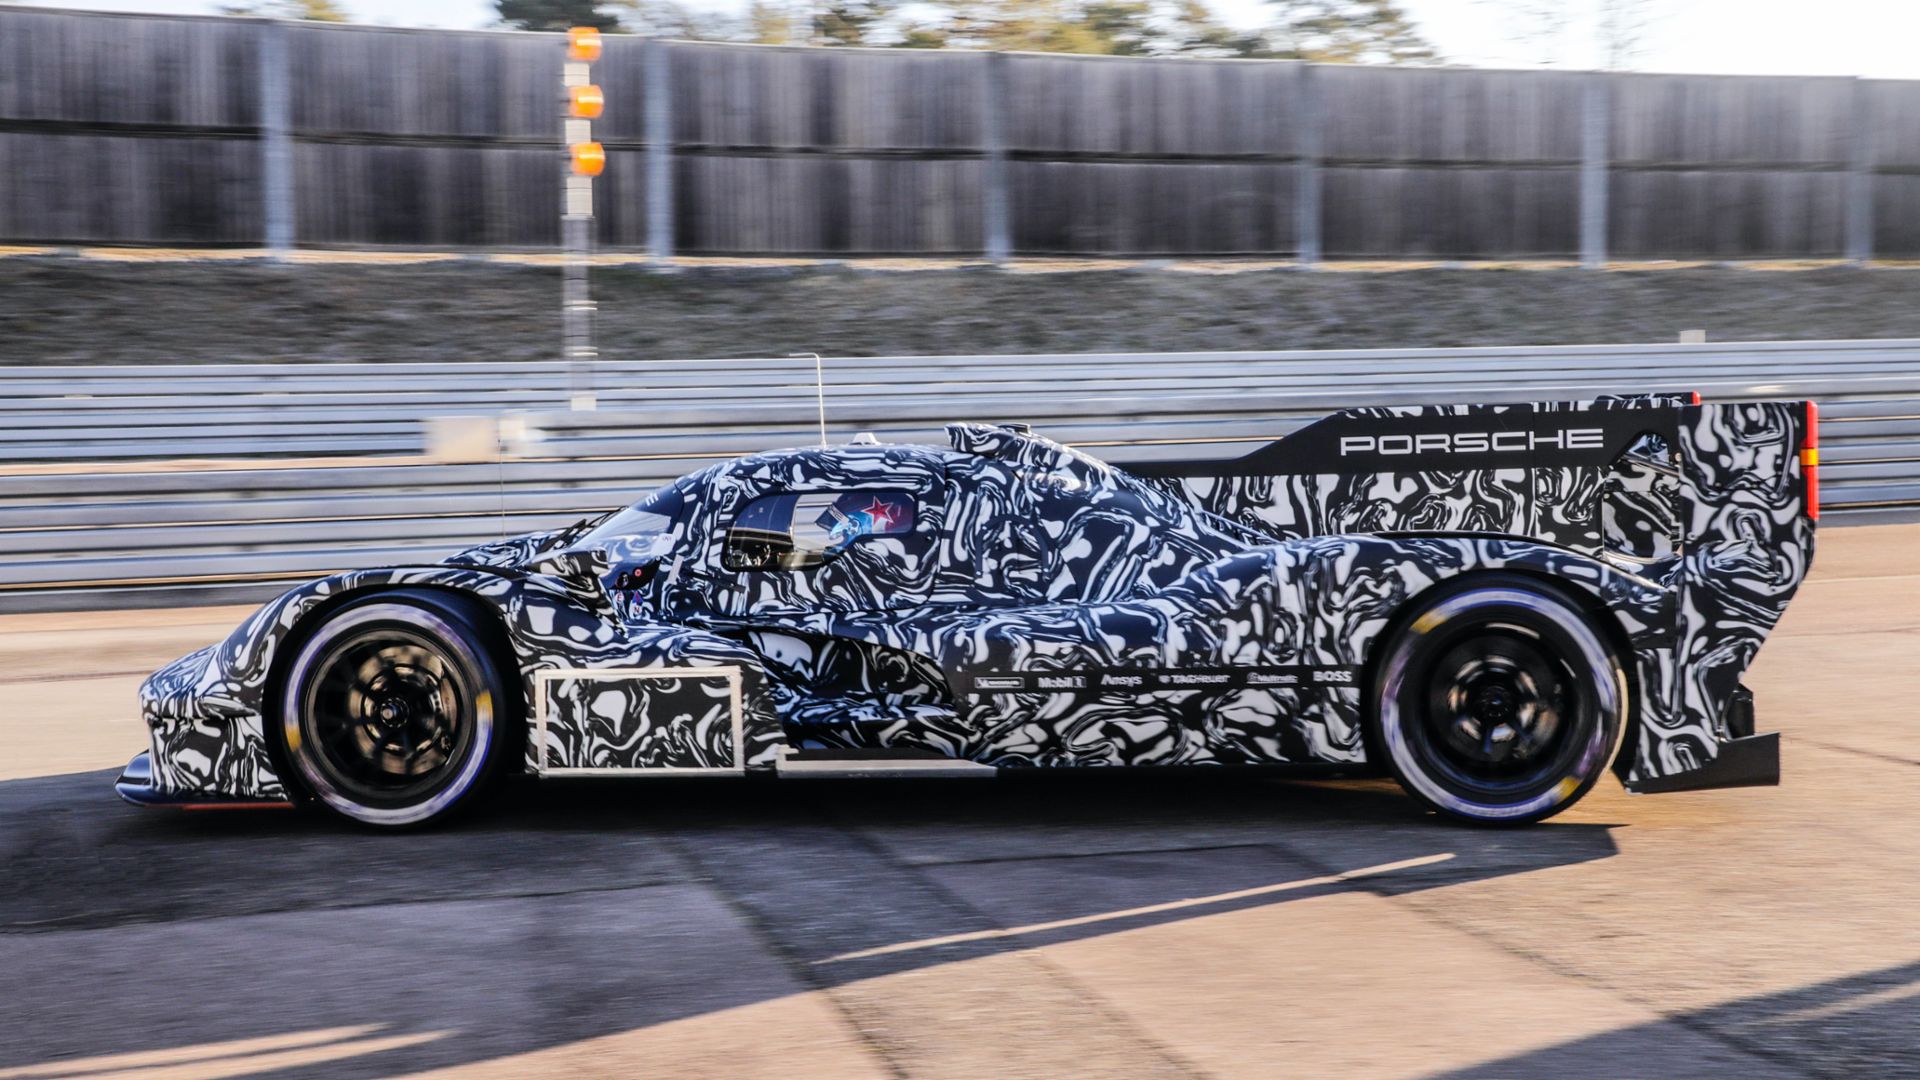 Here’s everything we know about Porsche’s new prototype race car